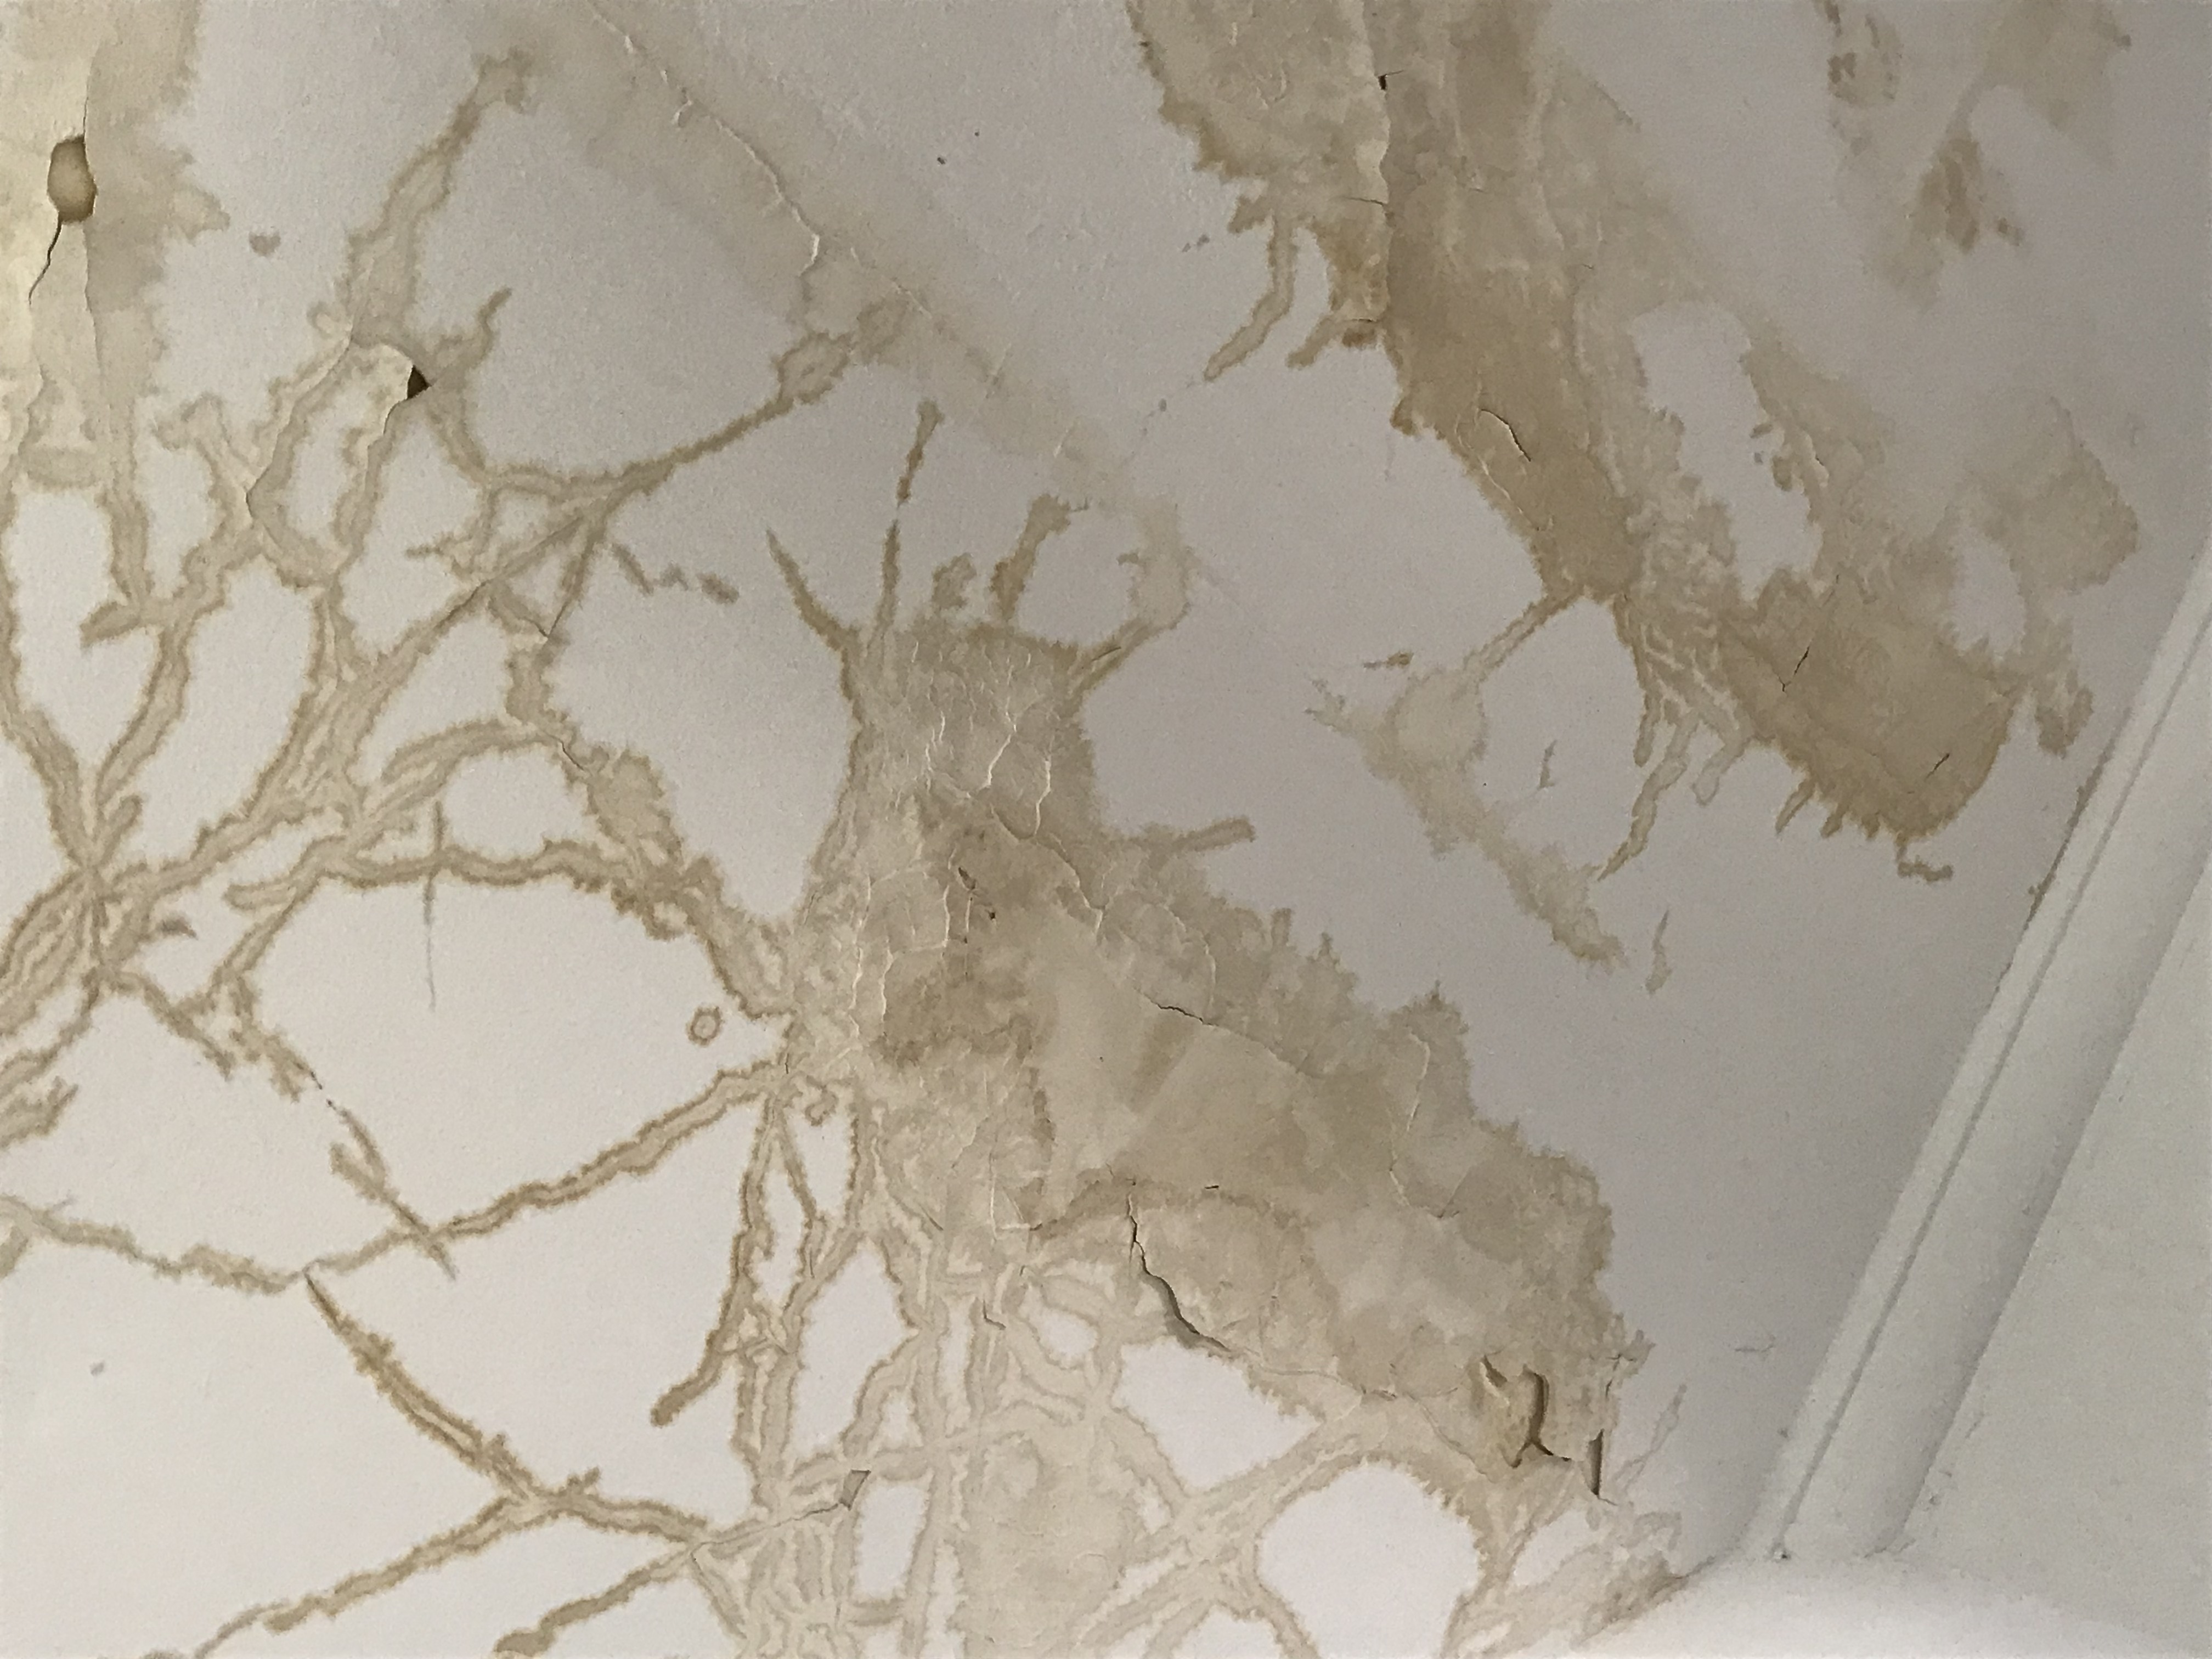 Water damage to Peter's ceiling